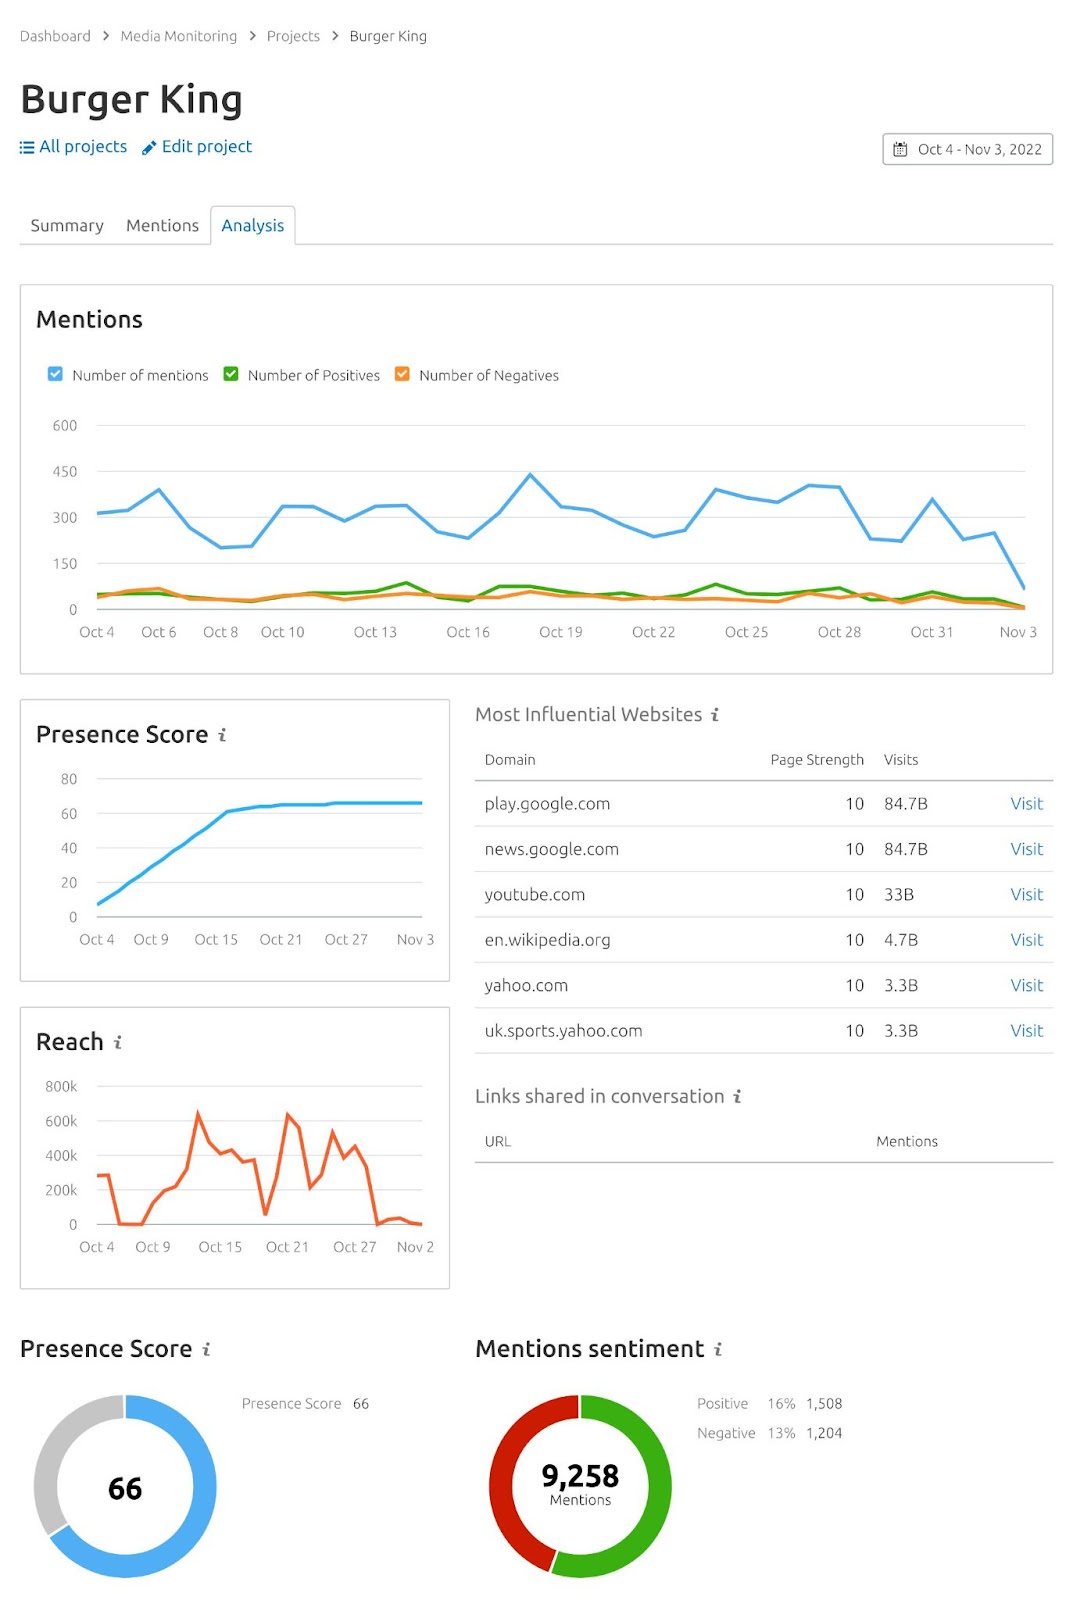 Burger Kind overview dashboard in Media Monitoring app